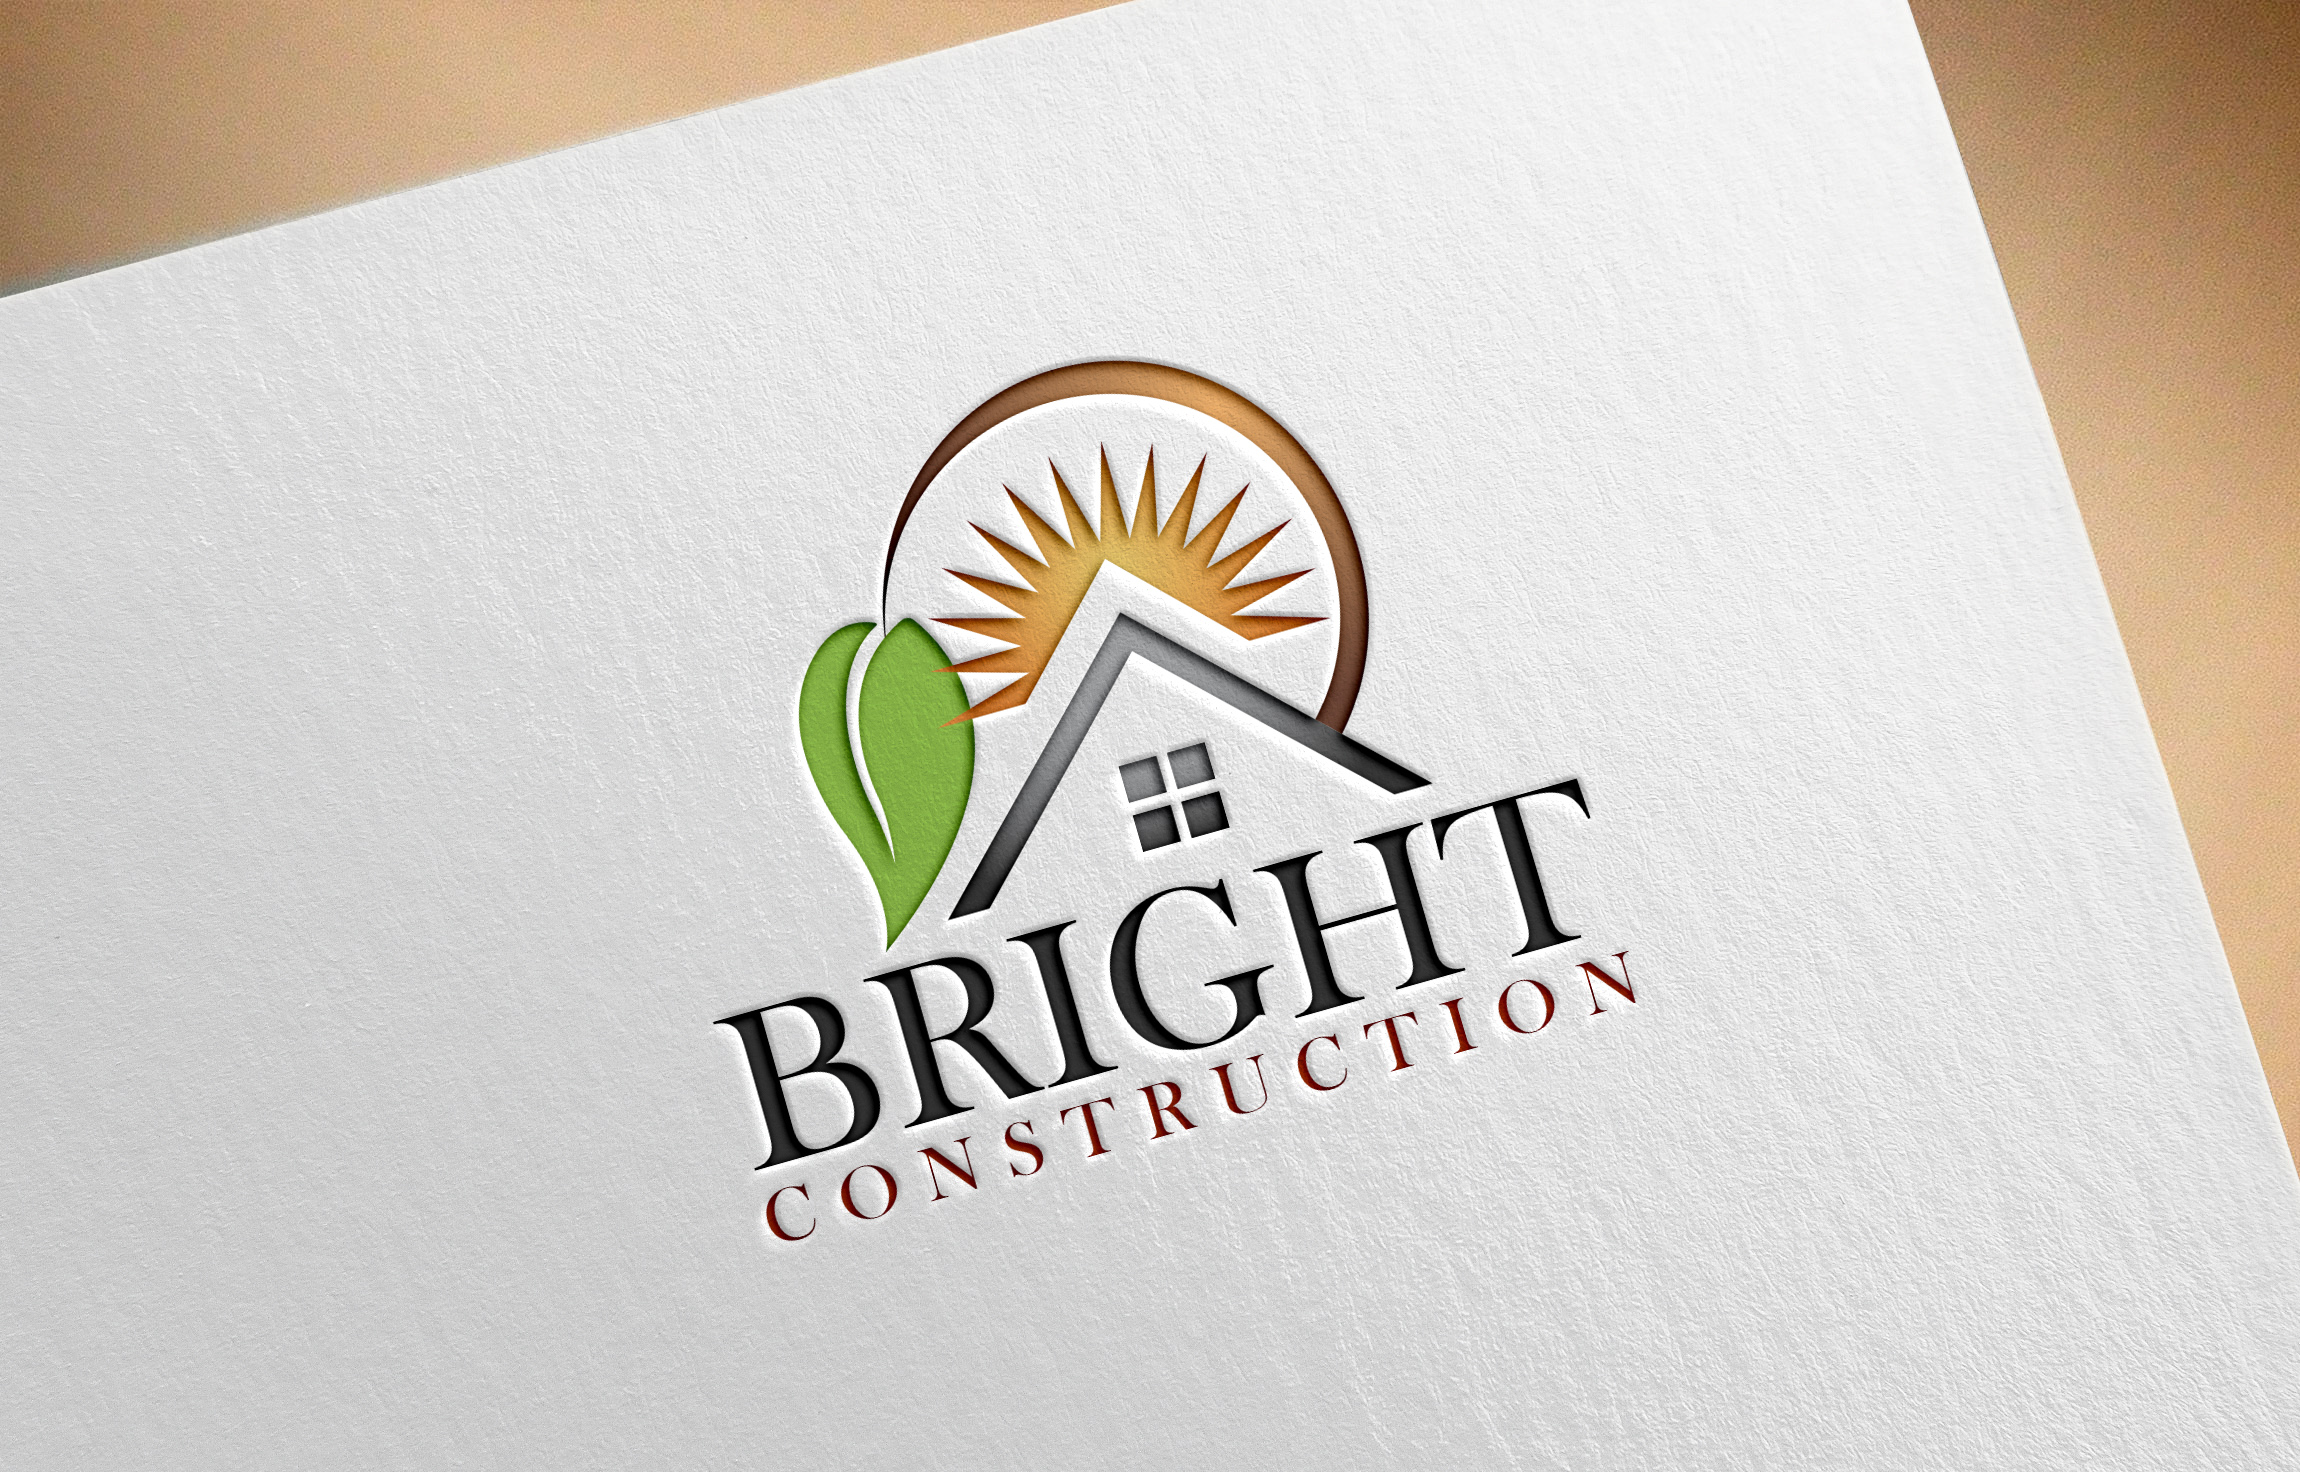 6202I will design an amazing logo for your company